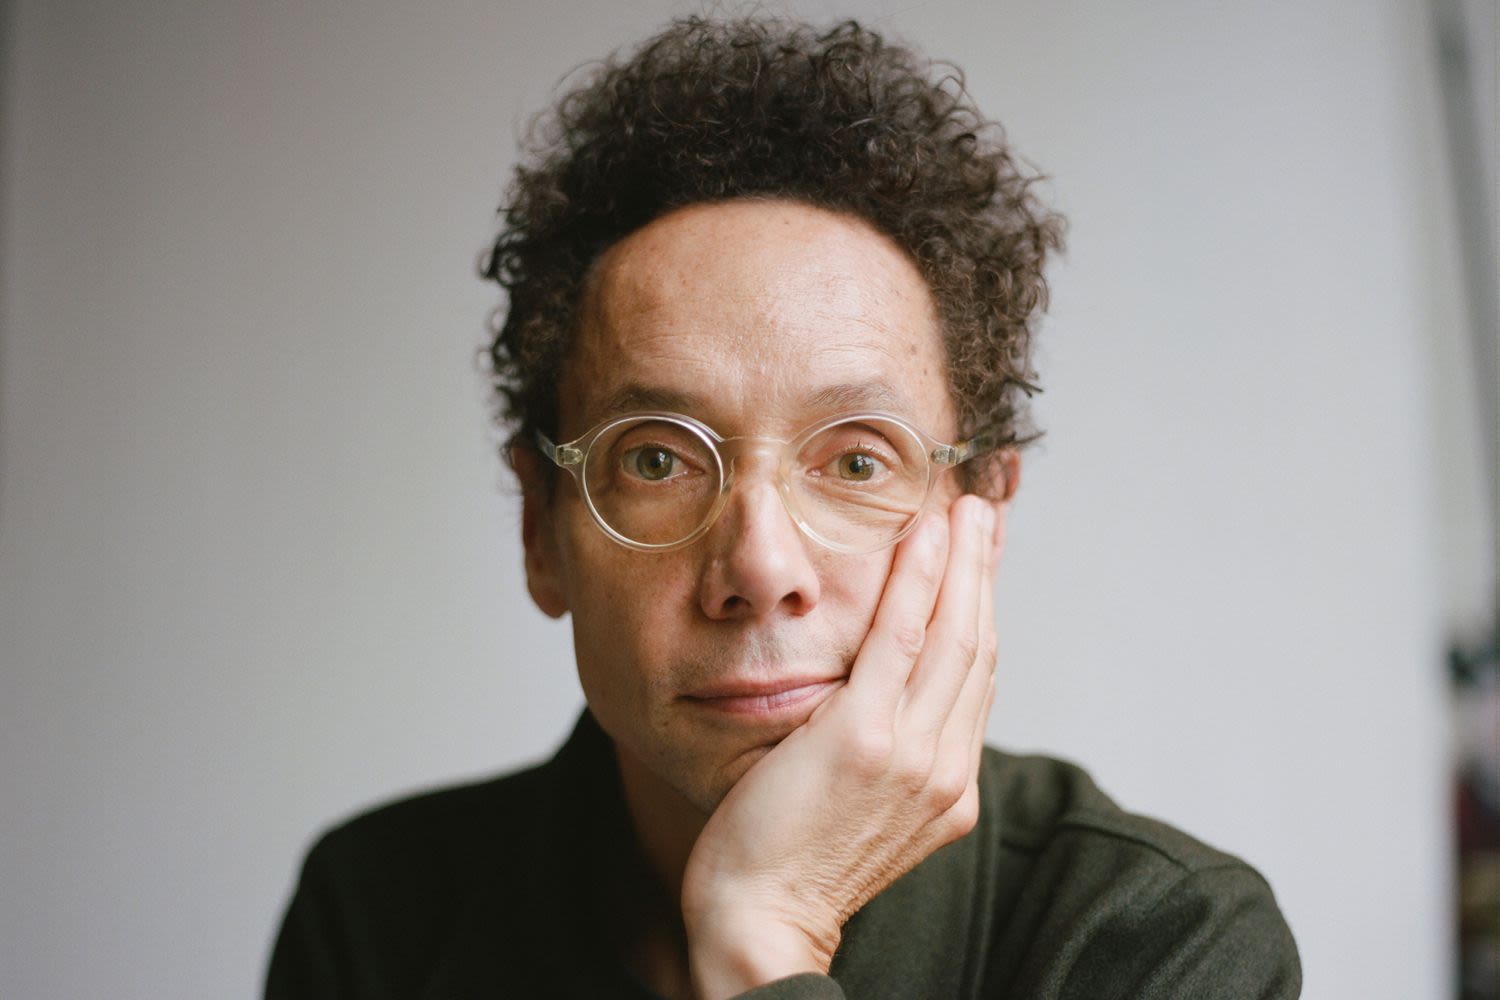 New Malcolm Gladwell Book, “Revenge of the Tipping Point, ”Coming This Fall